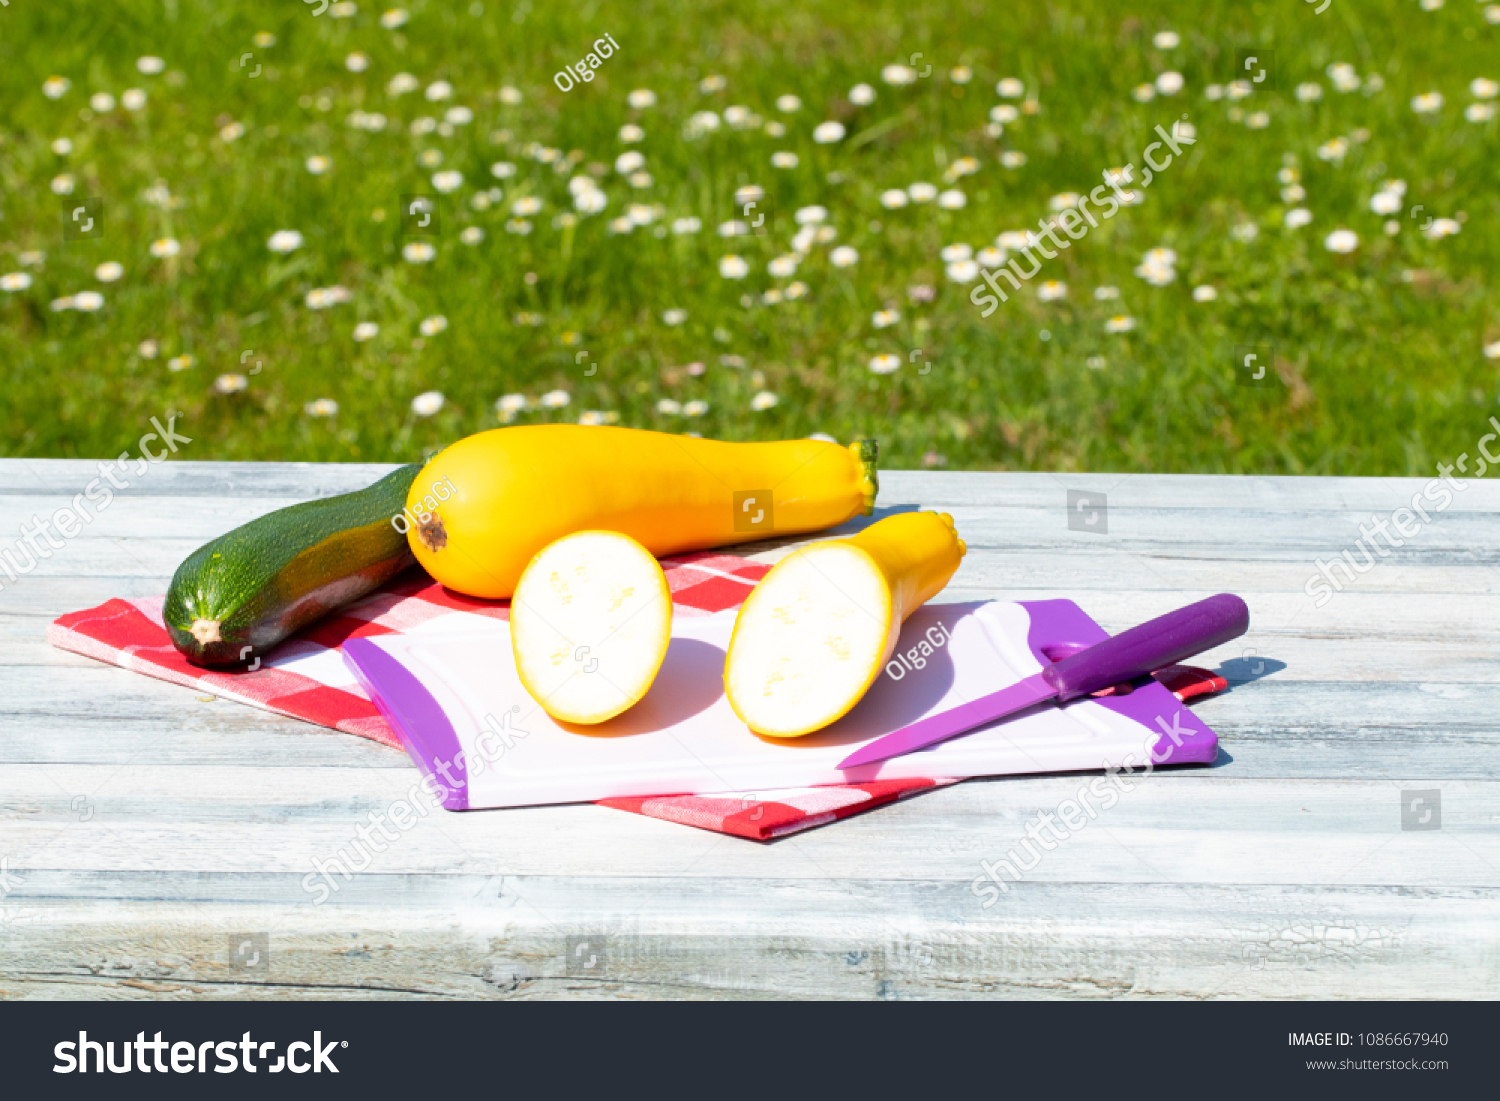 Three fresh courgette on rustic bright wooden table with natural green background. One of the yellow zucchini was freshly sliced on an cutting board. Concept health. #1086667940